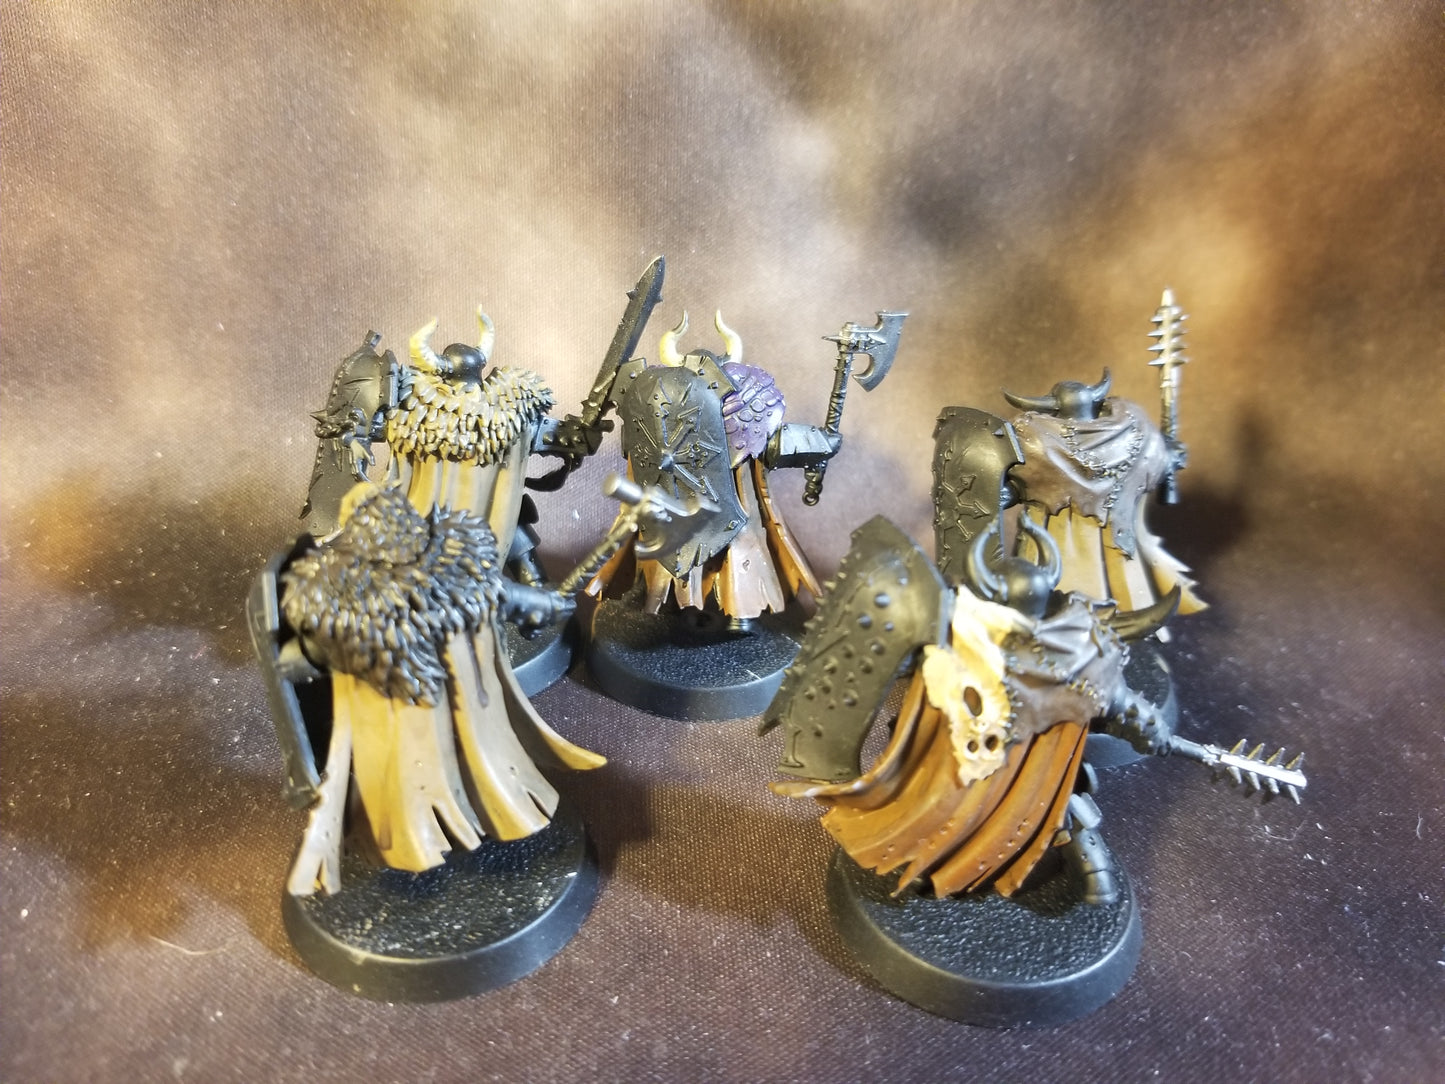 Warhammer Age of Sigmar Chaos Slaves to Darkness Warriors